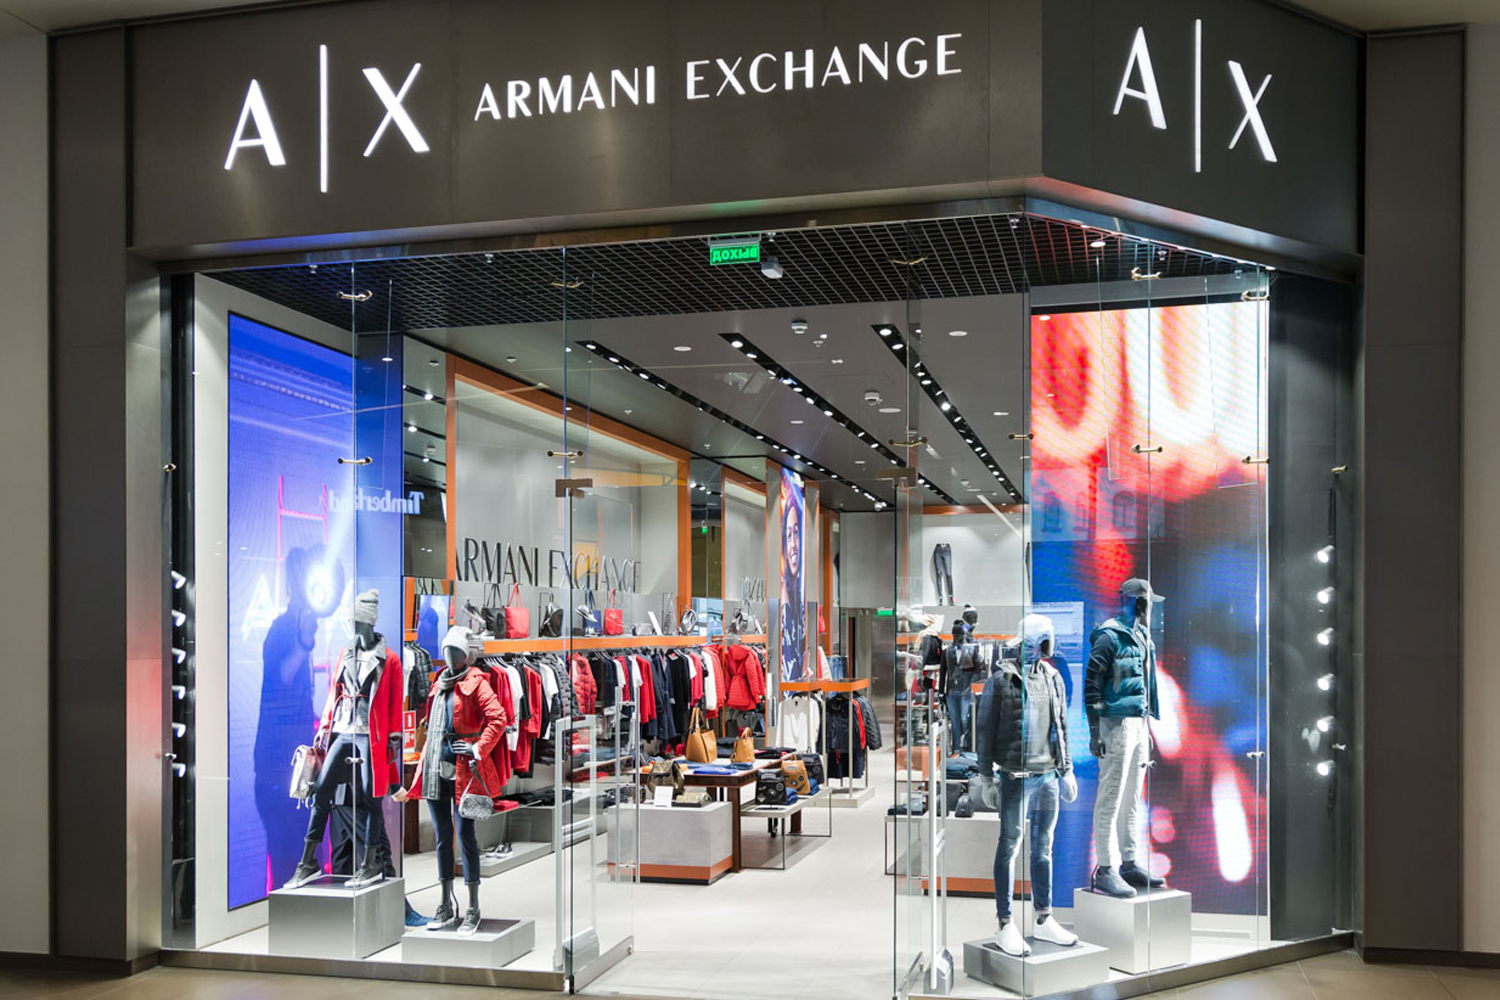 Armani exchange outlet